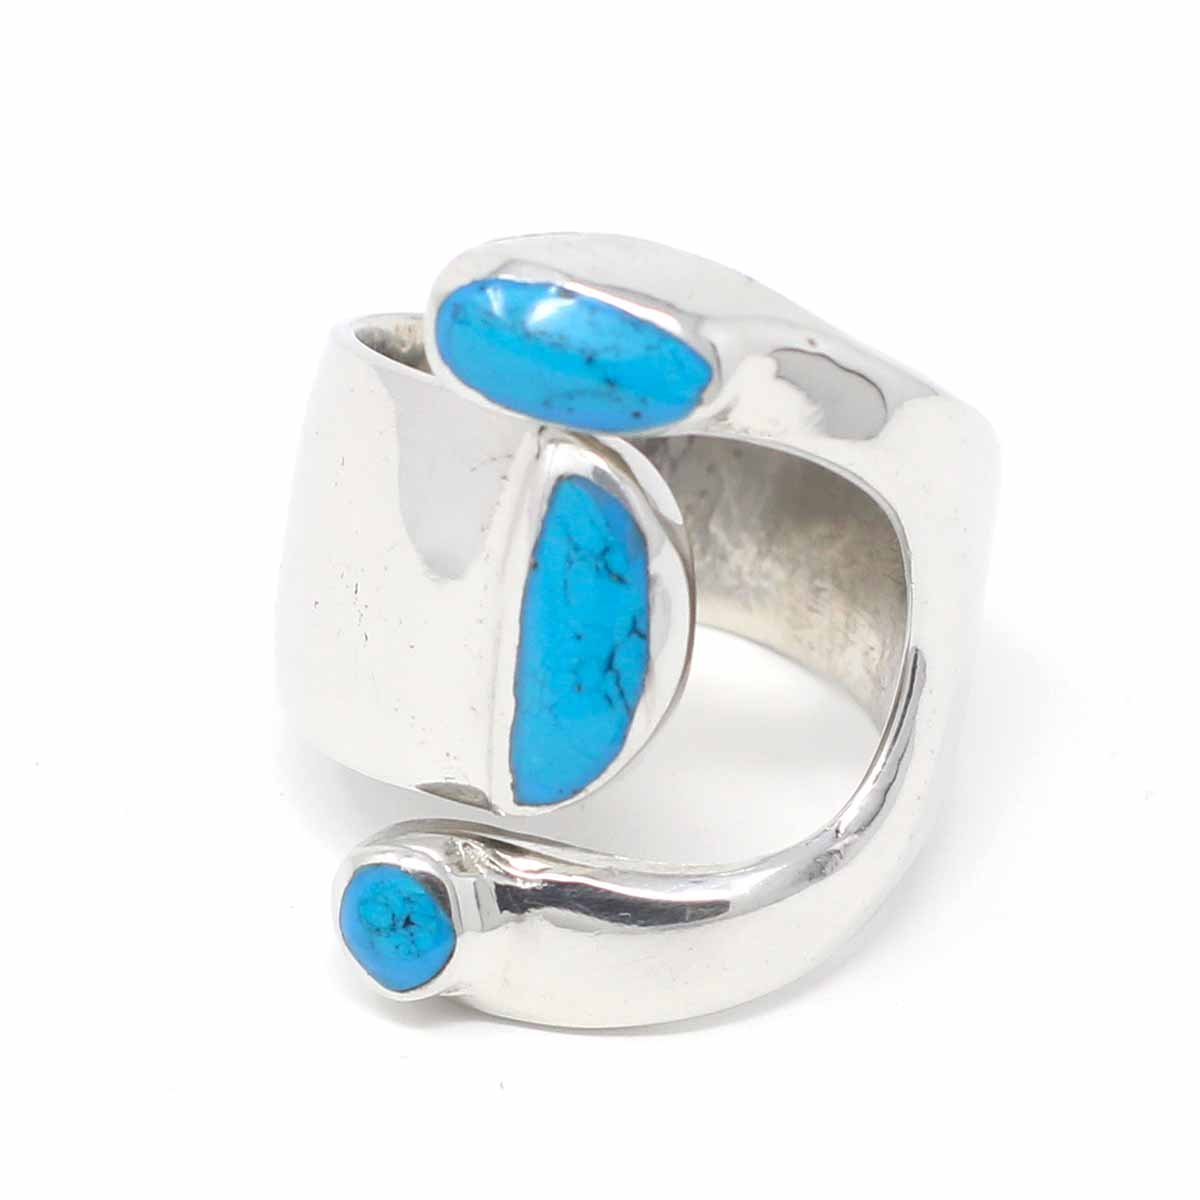 Alpaca Silver Wrap Ring, Turquoise - Size 8 - Yvonne’s 100th Wish Inc